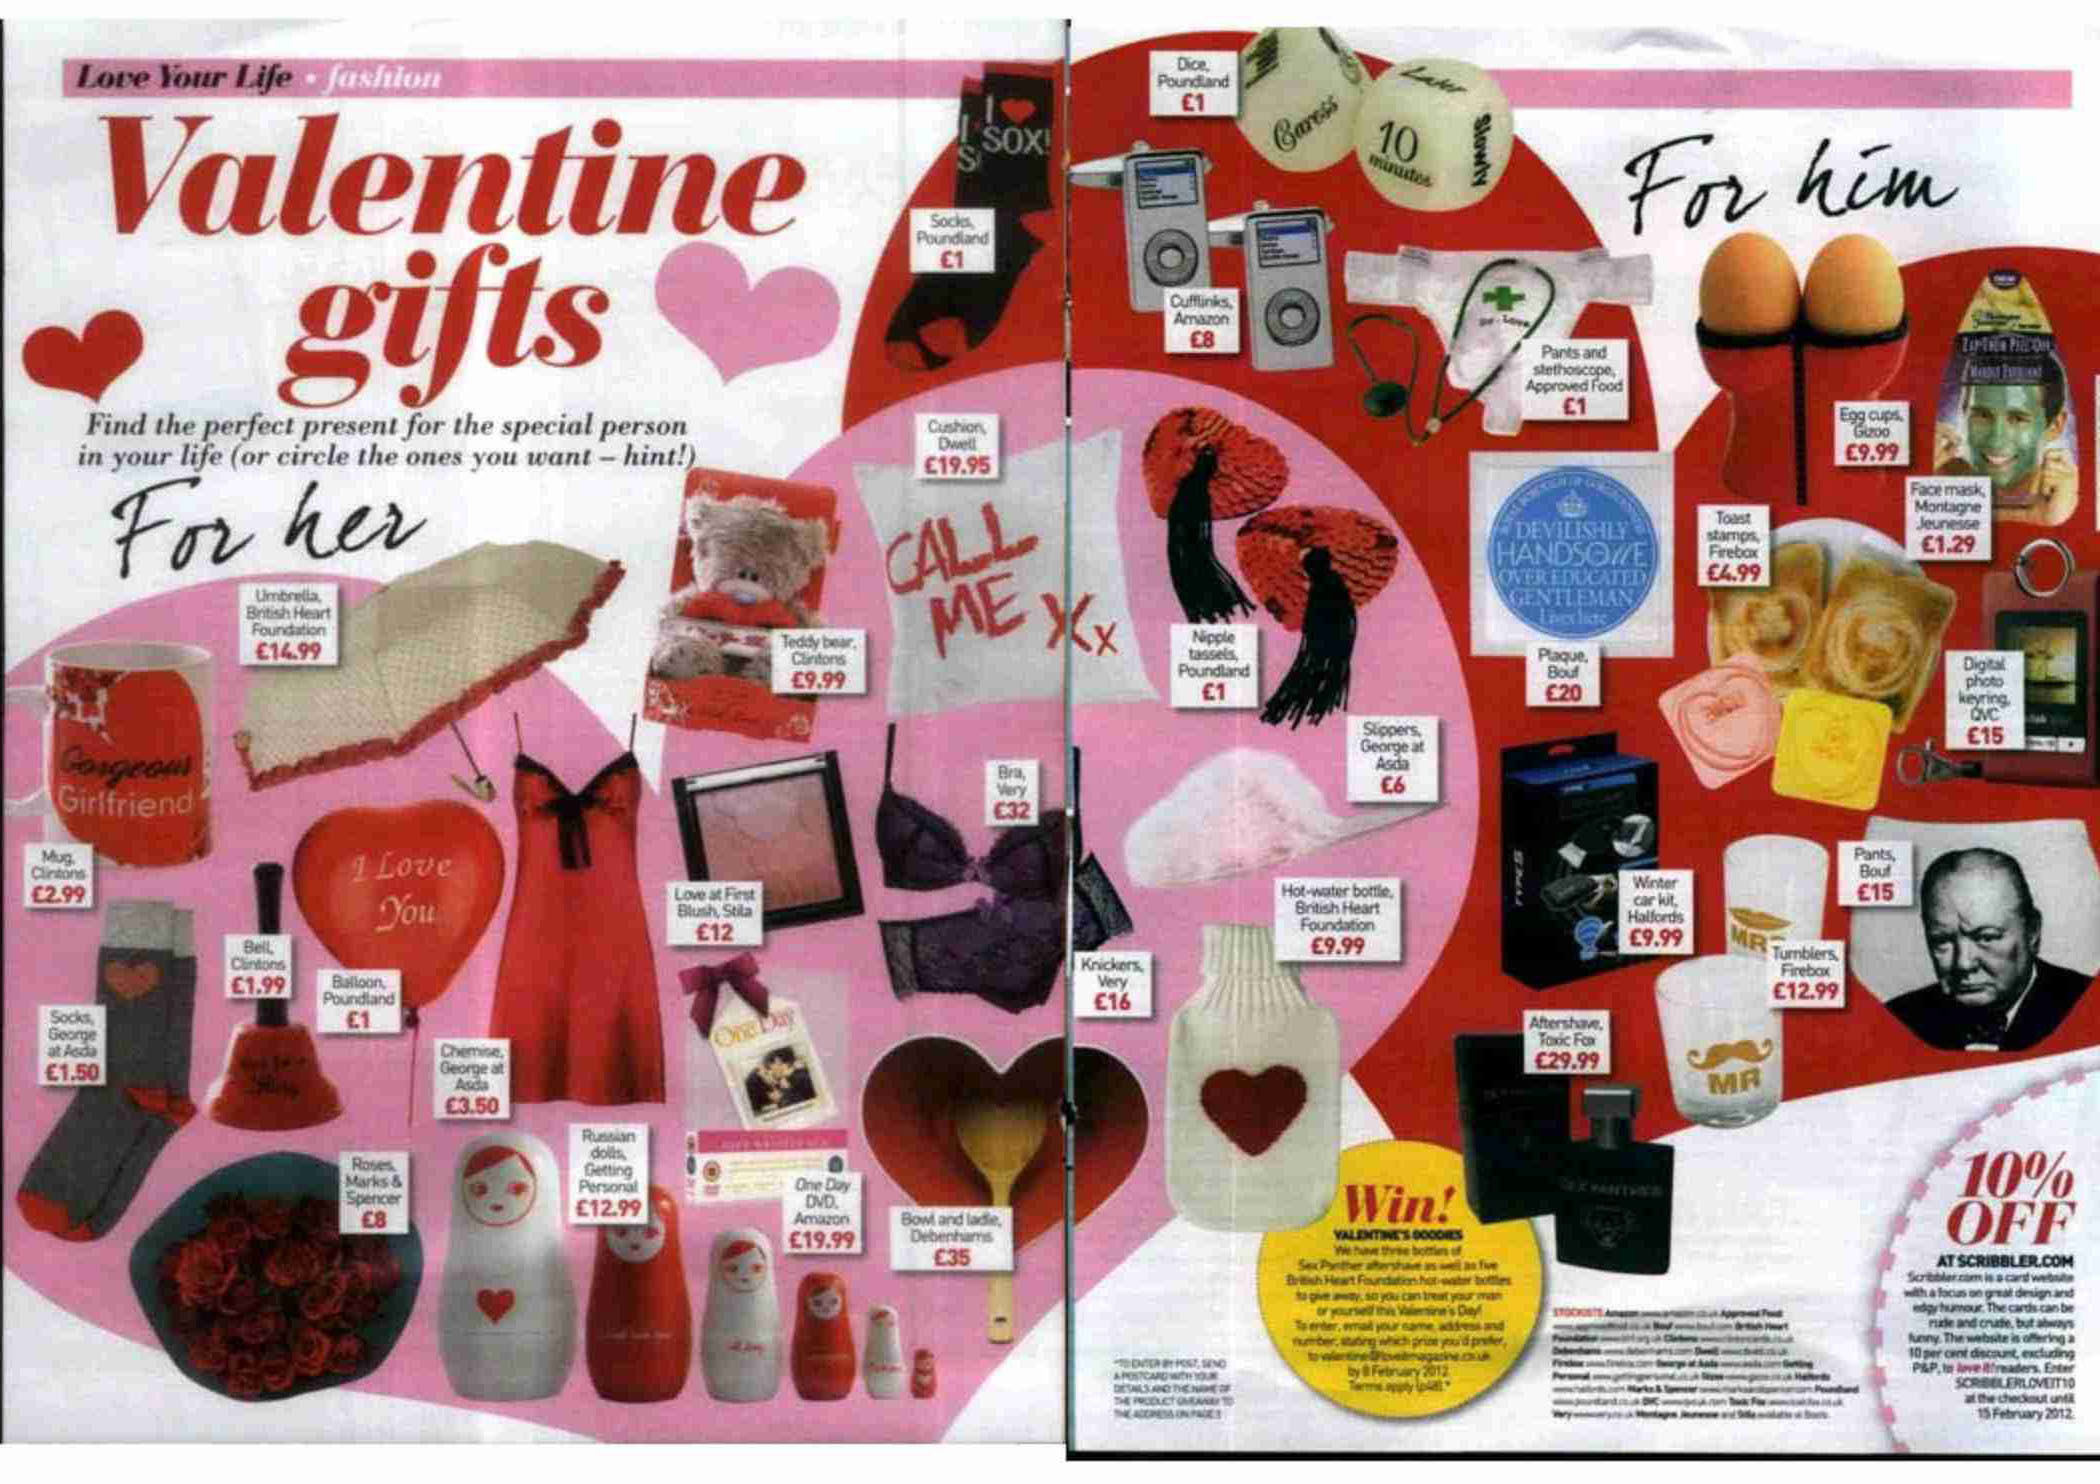 Male Valentine Gift Ideas
 Love It magazine selects Zap Them Peel f for Valentine’s